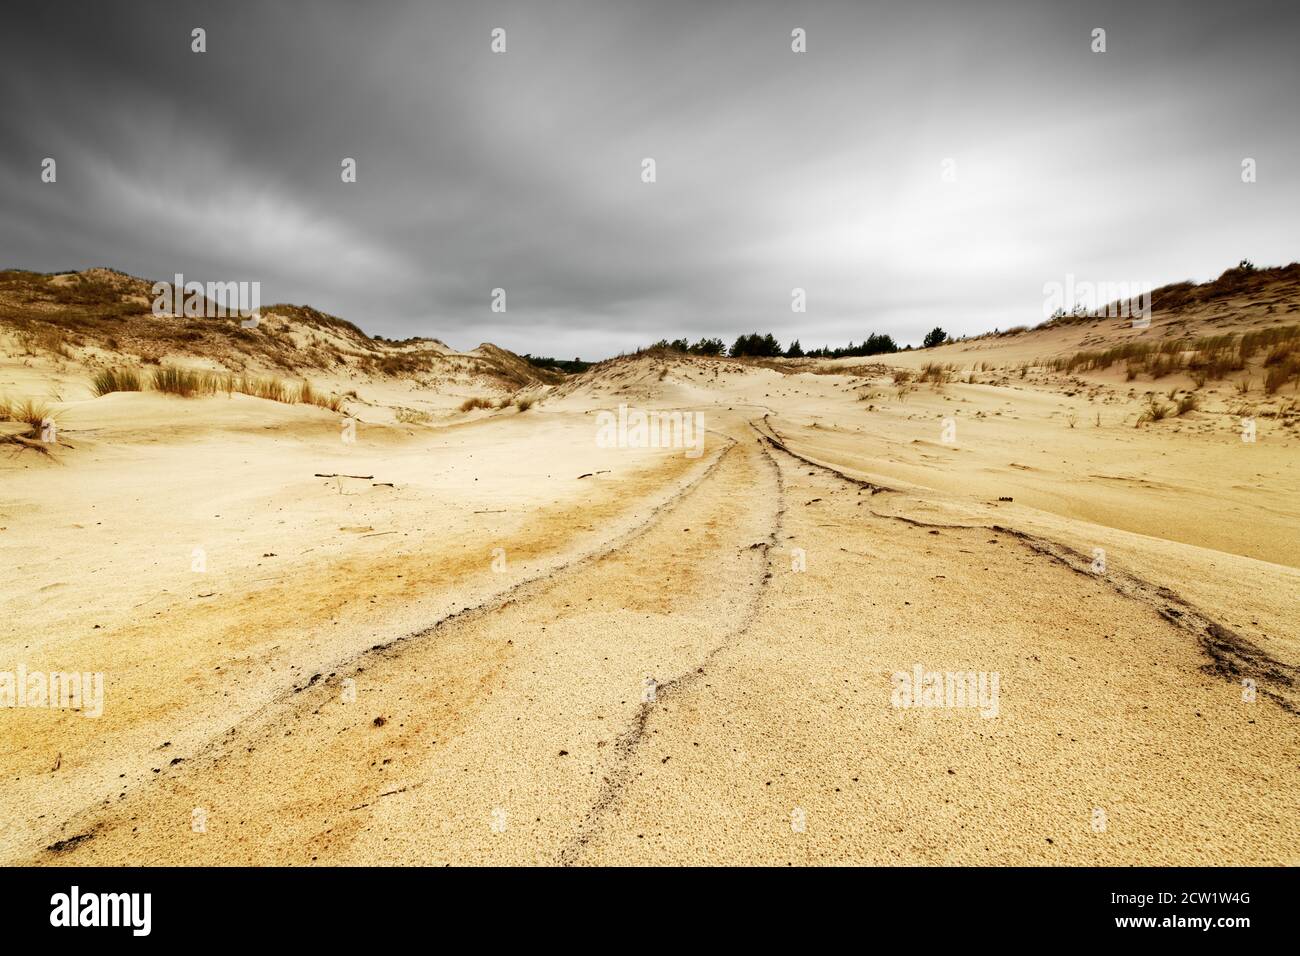 Wide sandy area with partly overgrown dunes in the background, striking lines as eye guidance, movement traces of the clouds due to long-term exposure Stock Photo